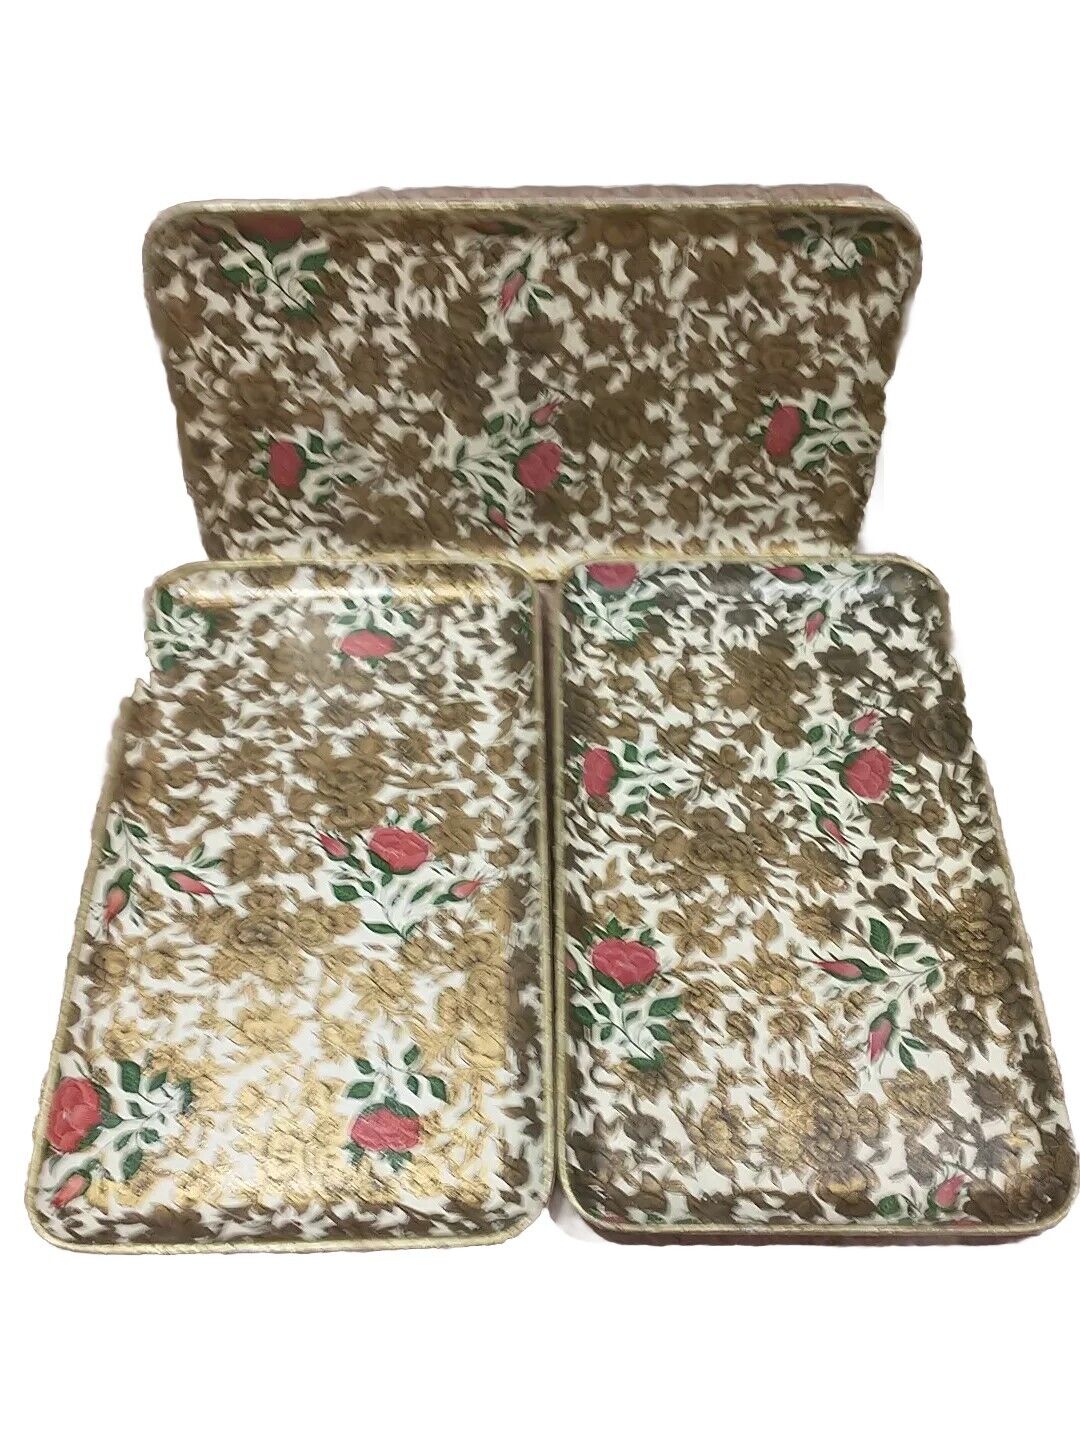 MCM Paper Mache Cocktail Trays Japanese Alfred Knobler Co Set Of 3 Alcohol Proof